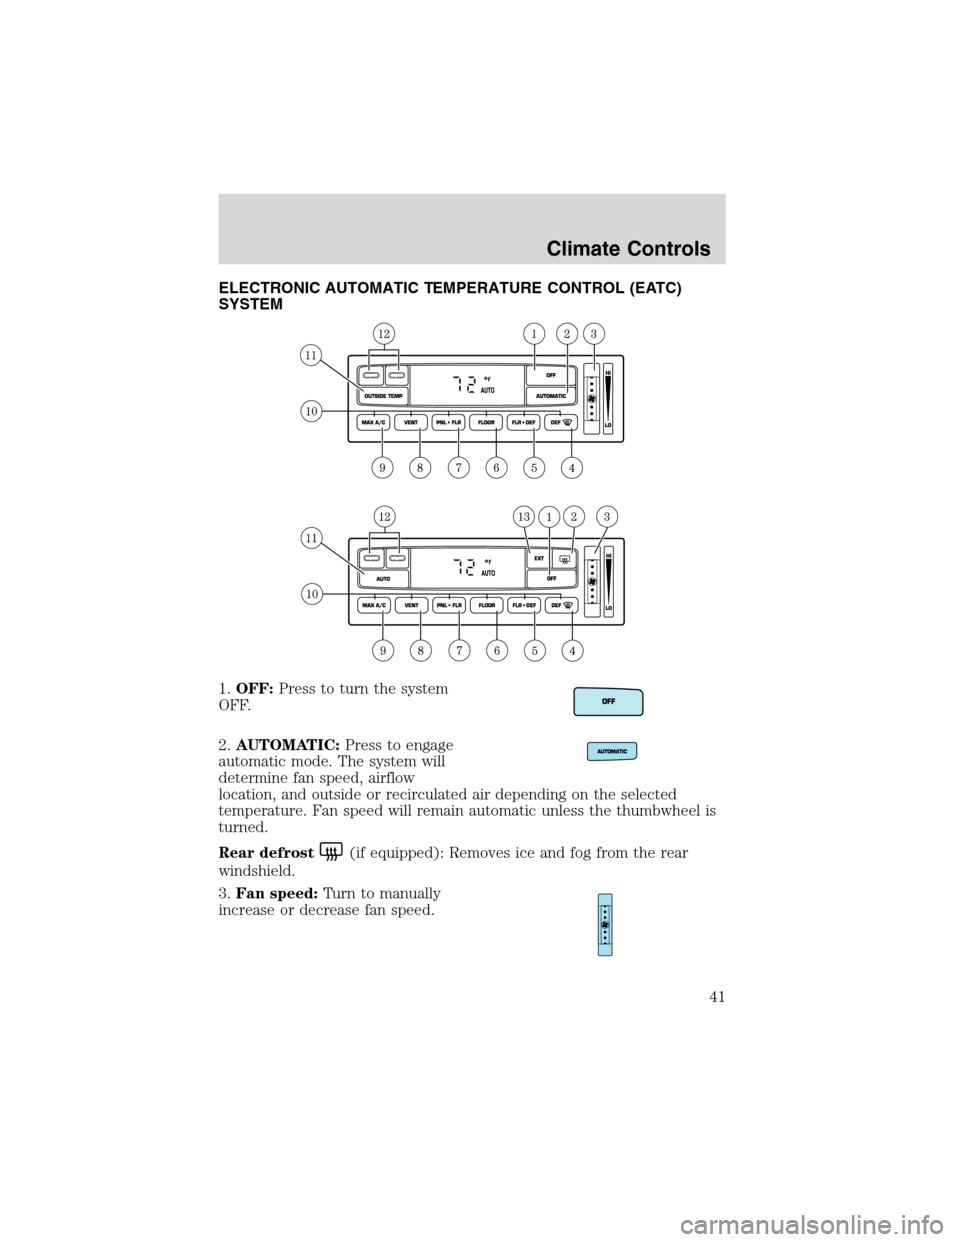 FORD F150 2003 10.G Service Manual ELECTRONIC AUTOMATIC TEMPERATURE CONTROL (EATC)
SYSTEM
1.OFF:Press to turn the system
OFF.
2.AUTOMATIC:Press to engage
automatic mode. The system will
determine fan speed, airflow
location, and outsid